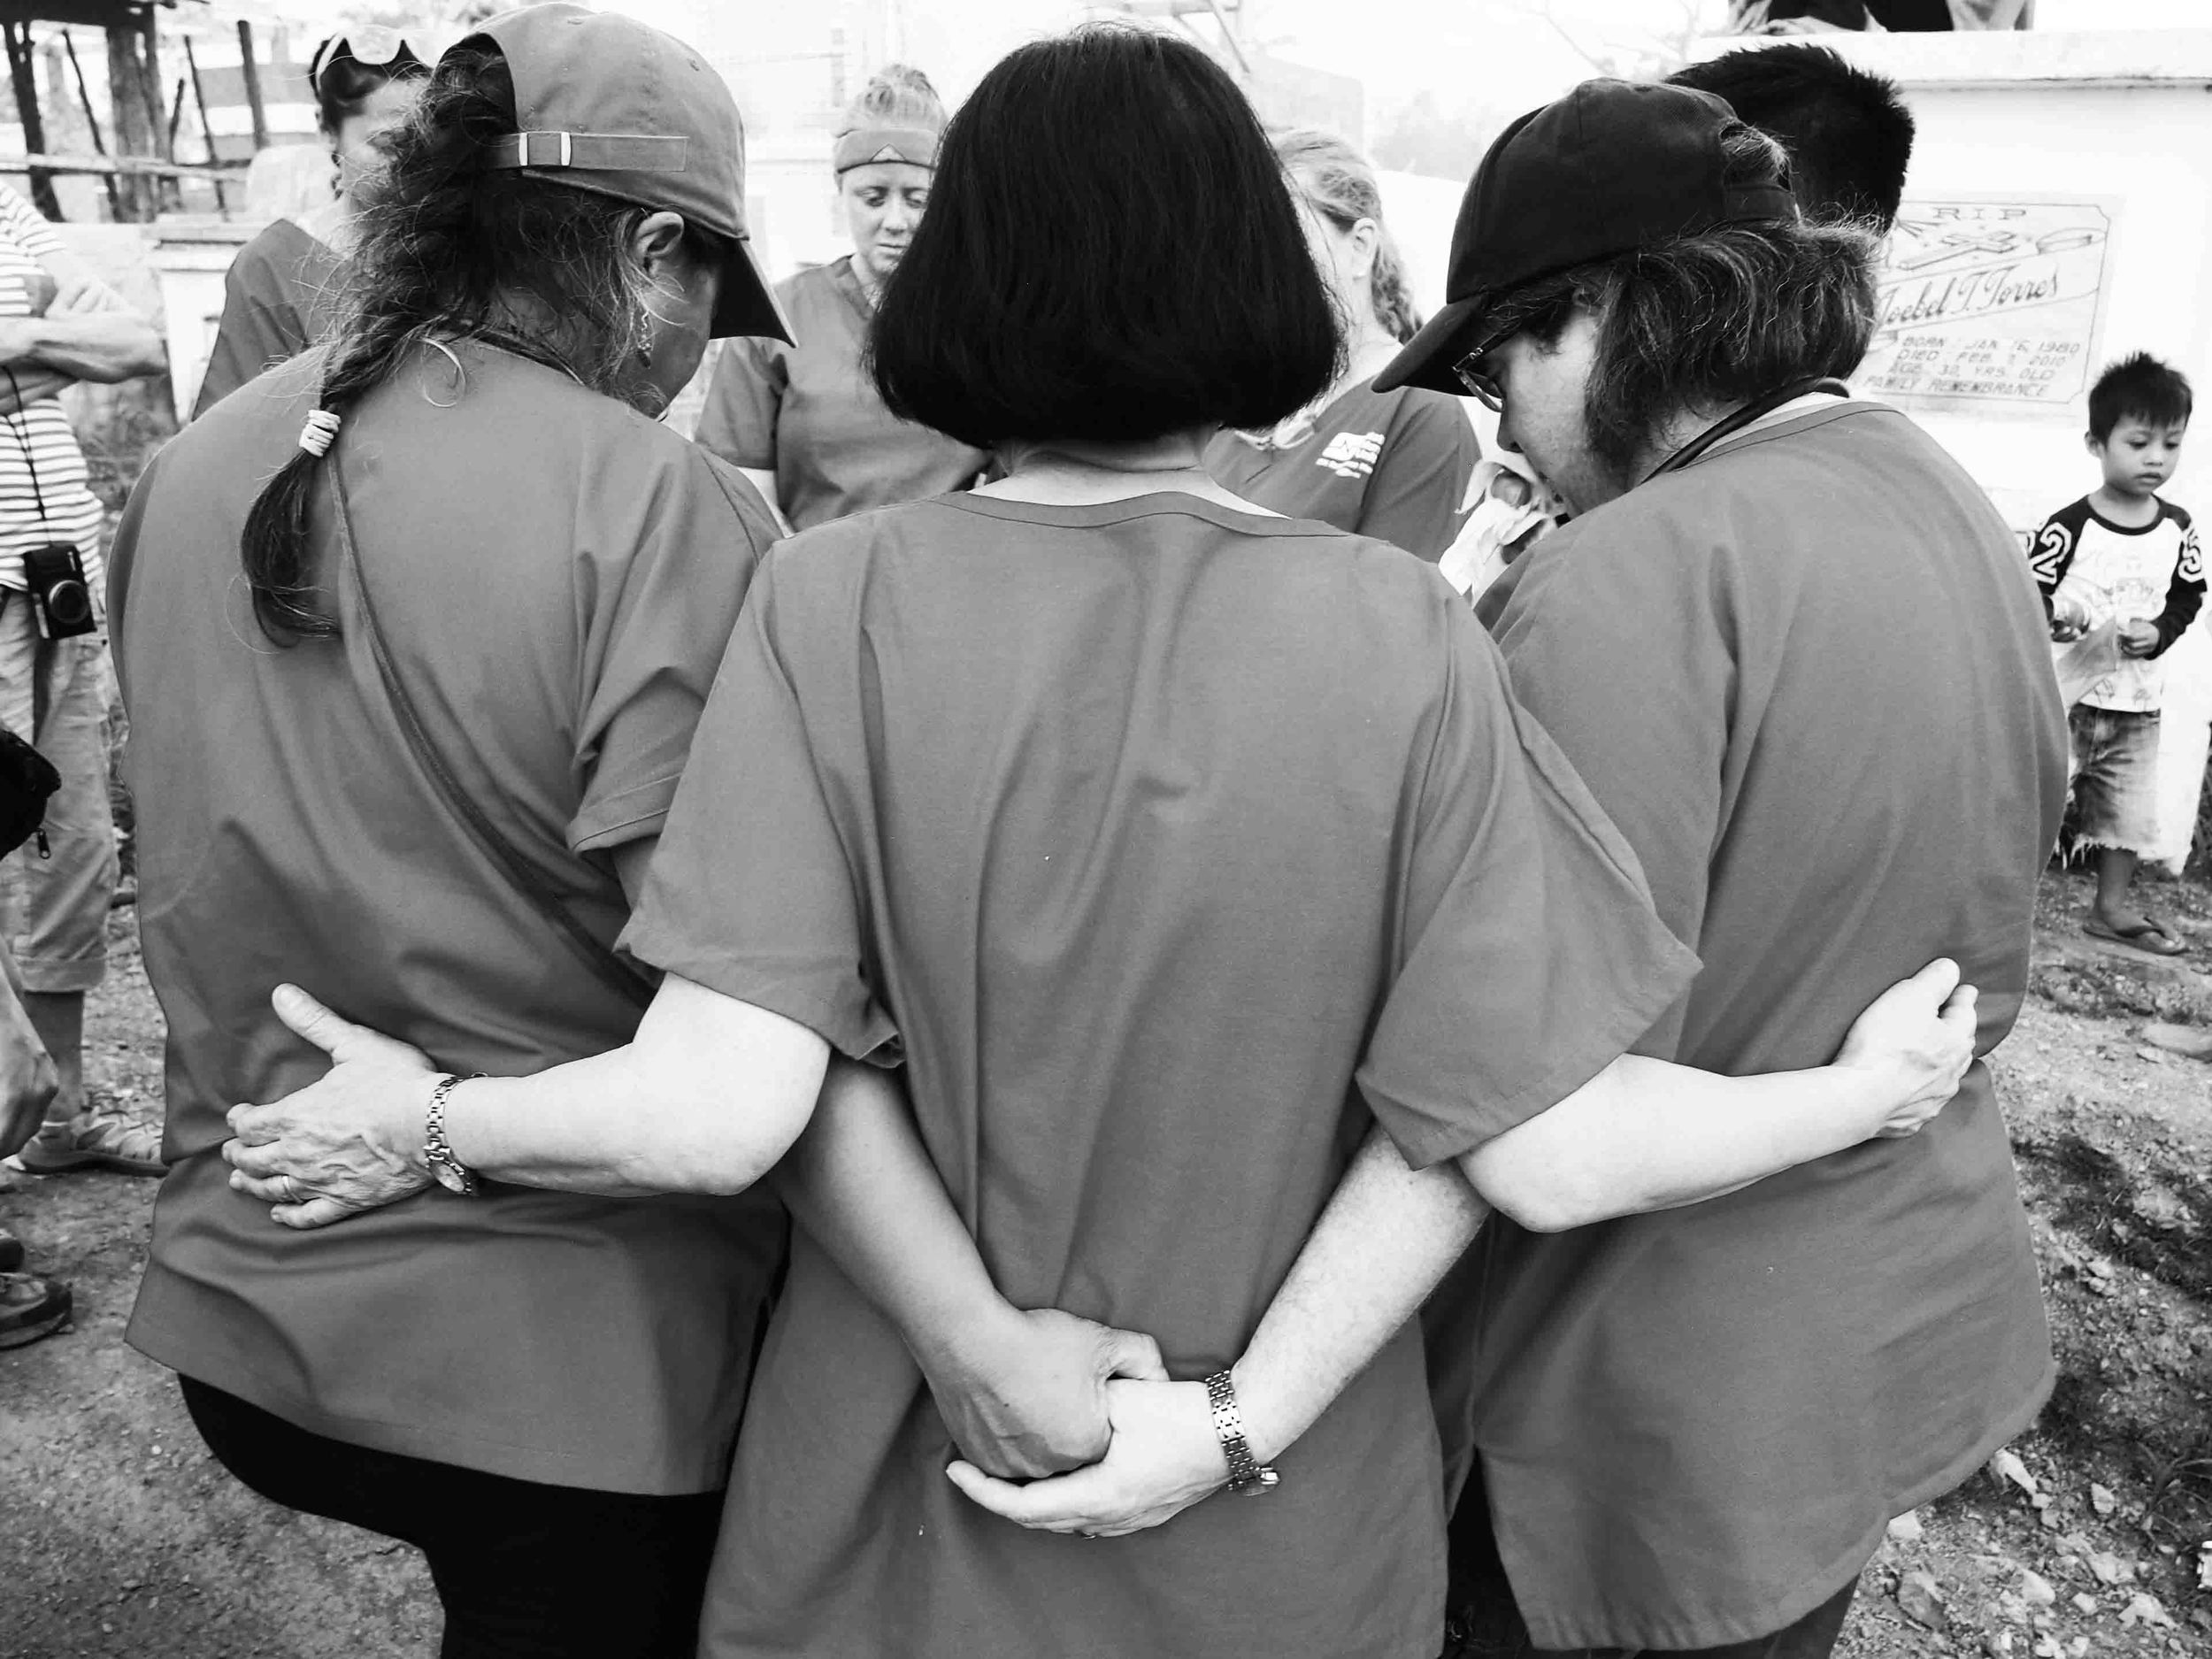   Nurses join hands and bow their heads to pay their respects at a mass grave containing unidentified victims of Typhoon Haiyan.&nbsp;  